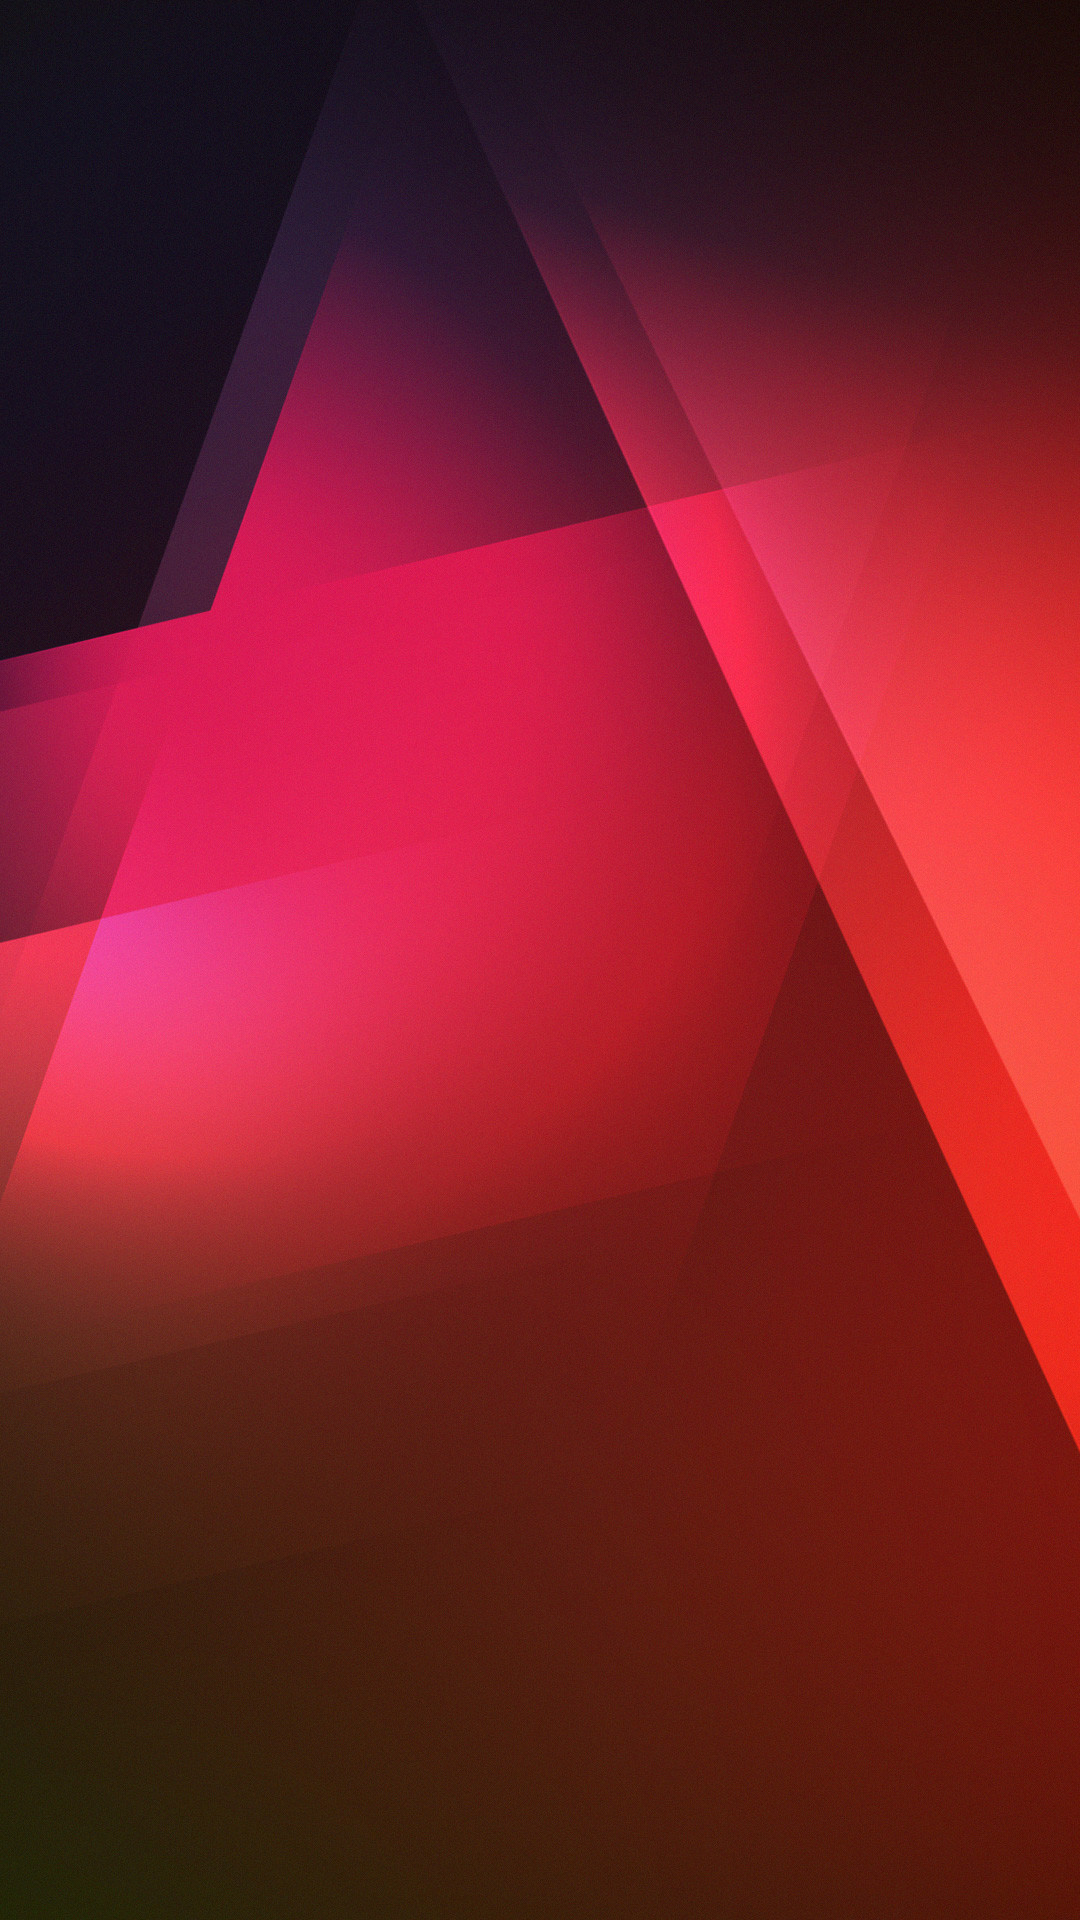 1080x1920 Red Triangles Gradient Shadows iPhone 6 Plus HD Wallpaper ...